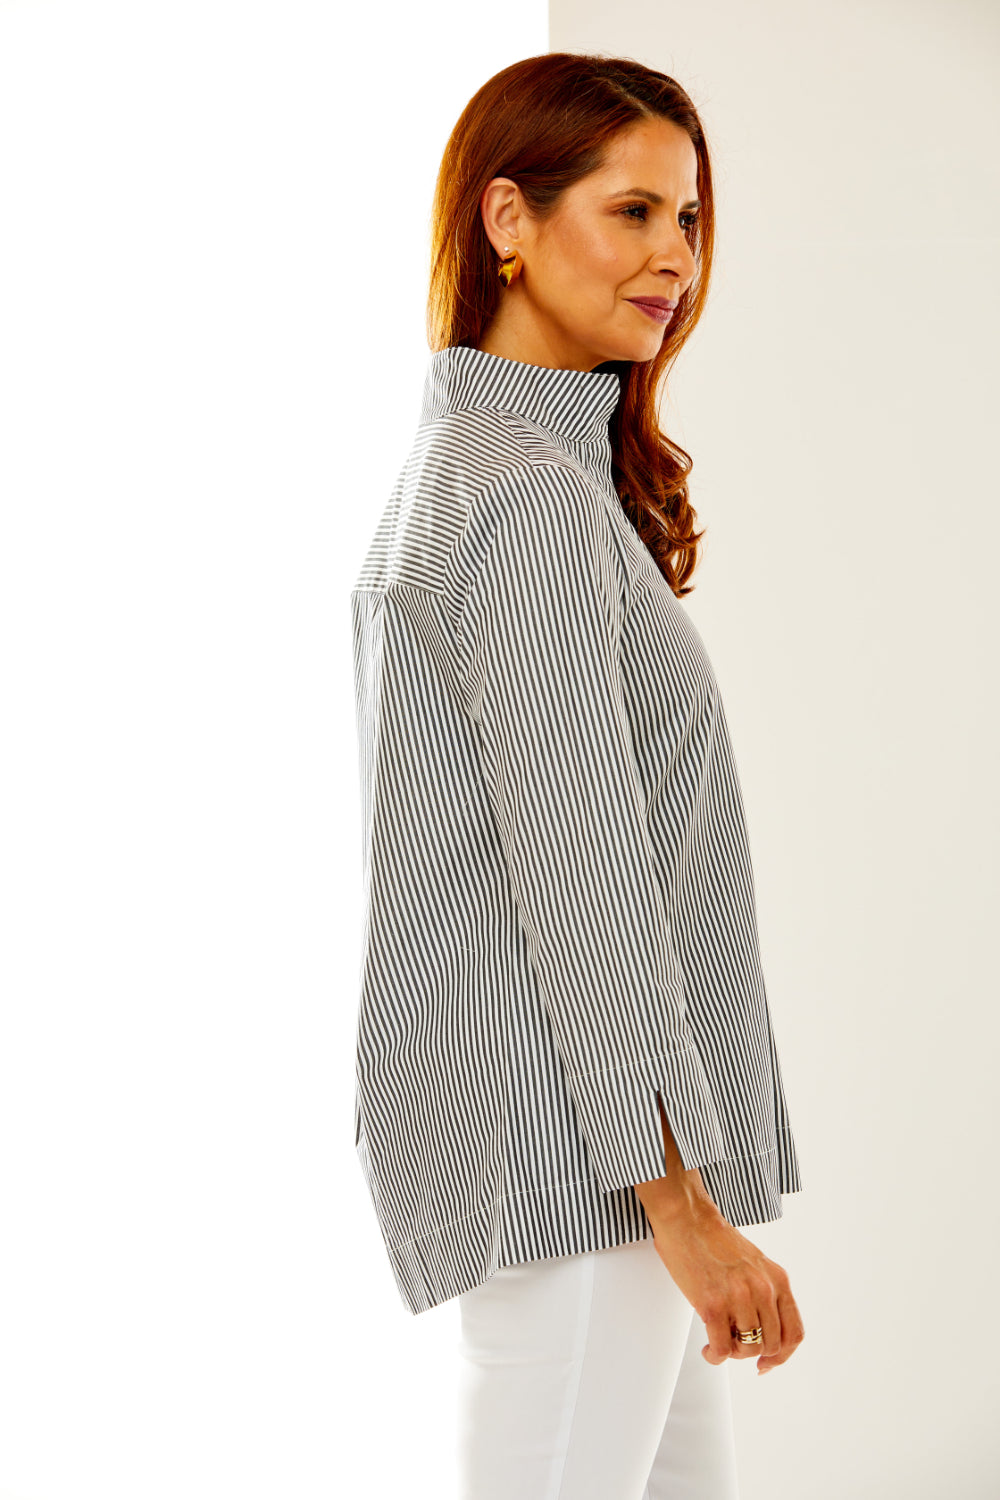 Woman in black and white stripe shirt